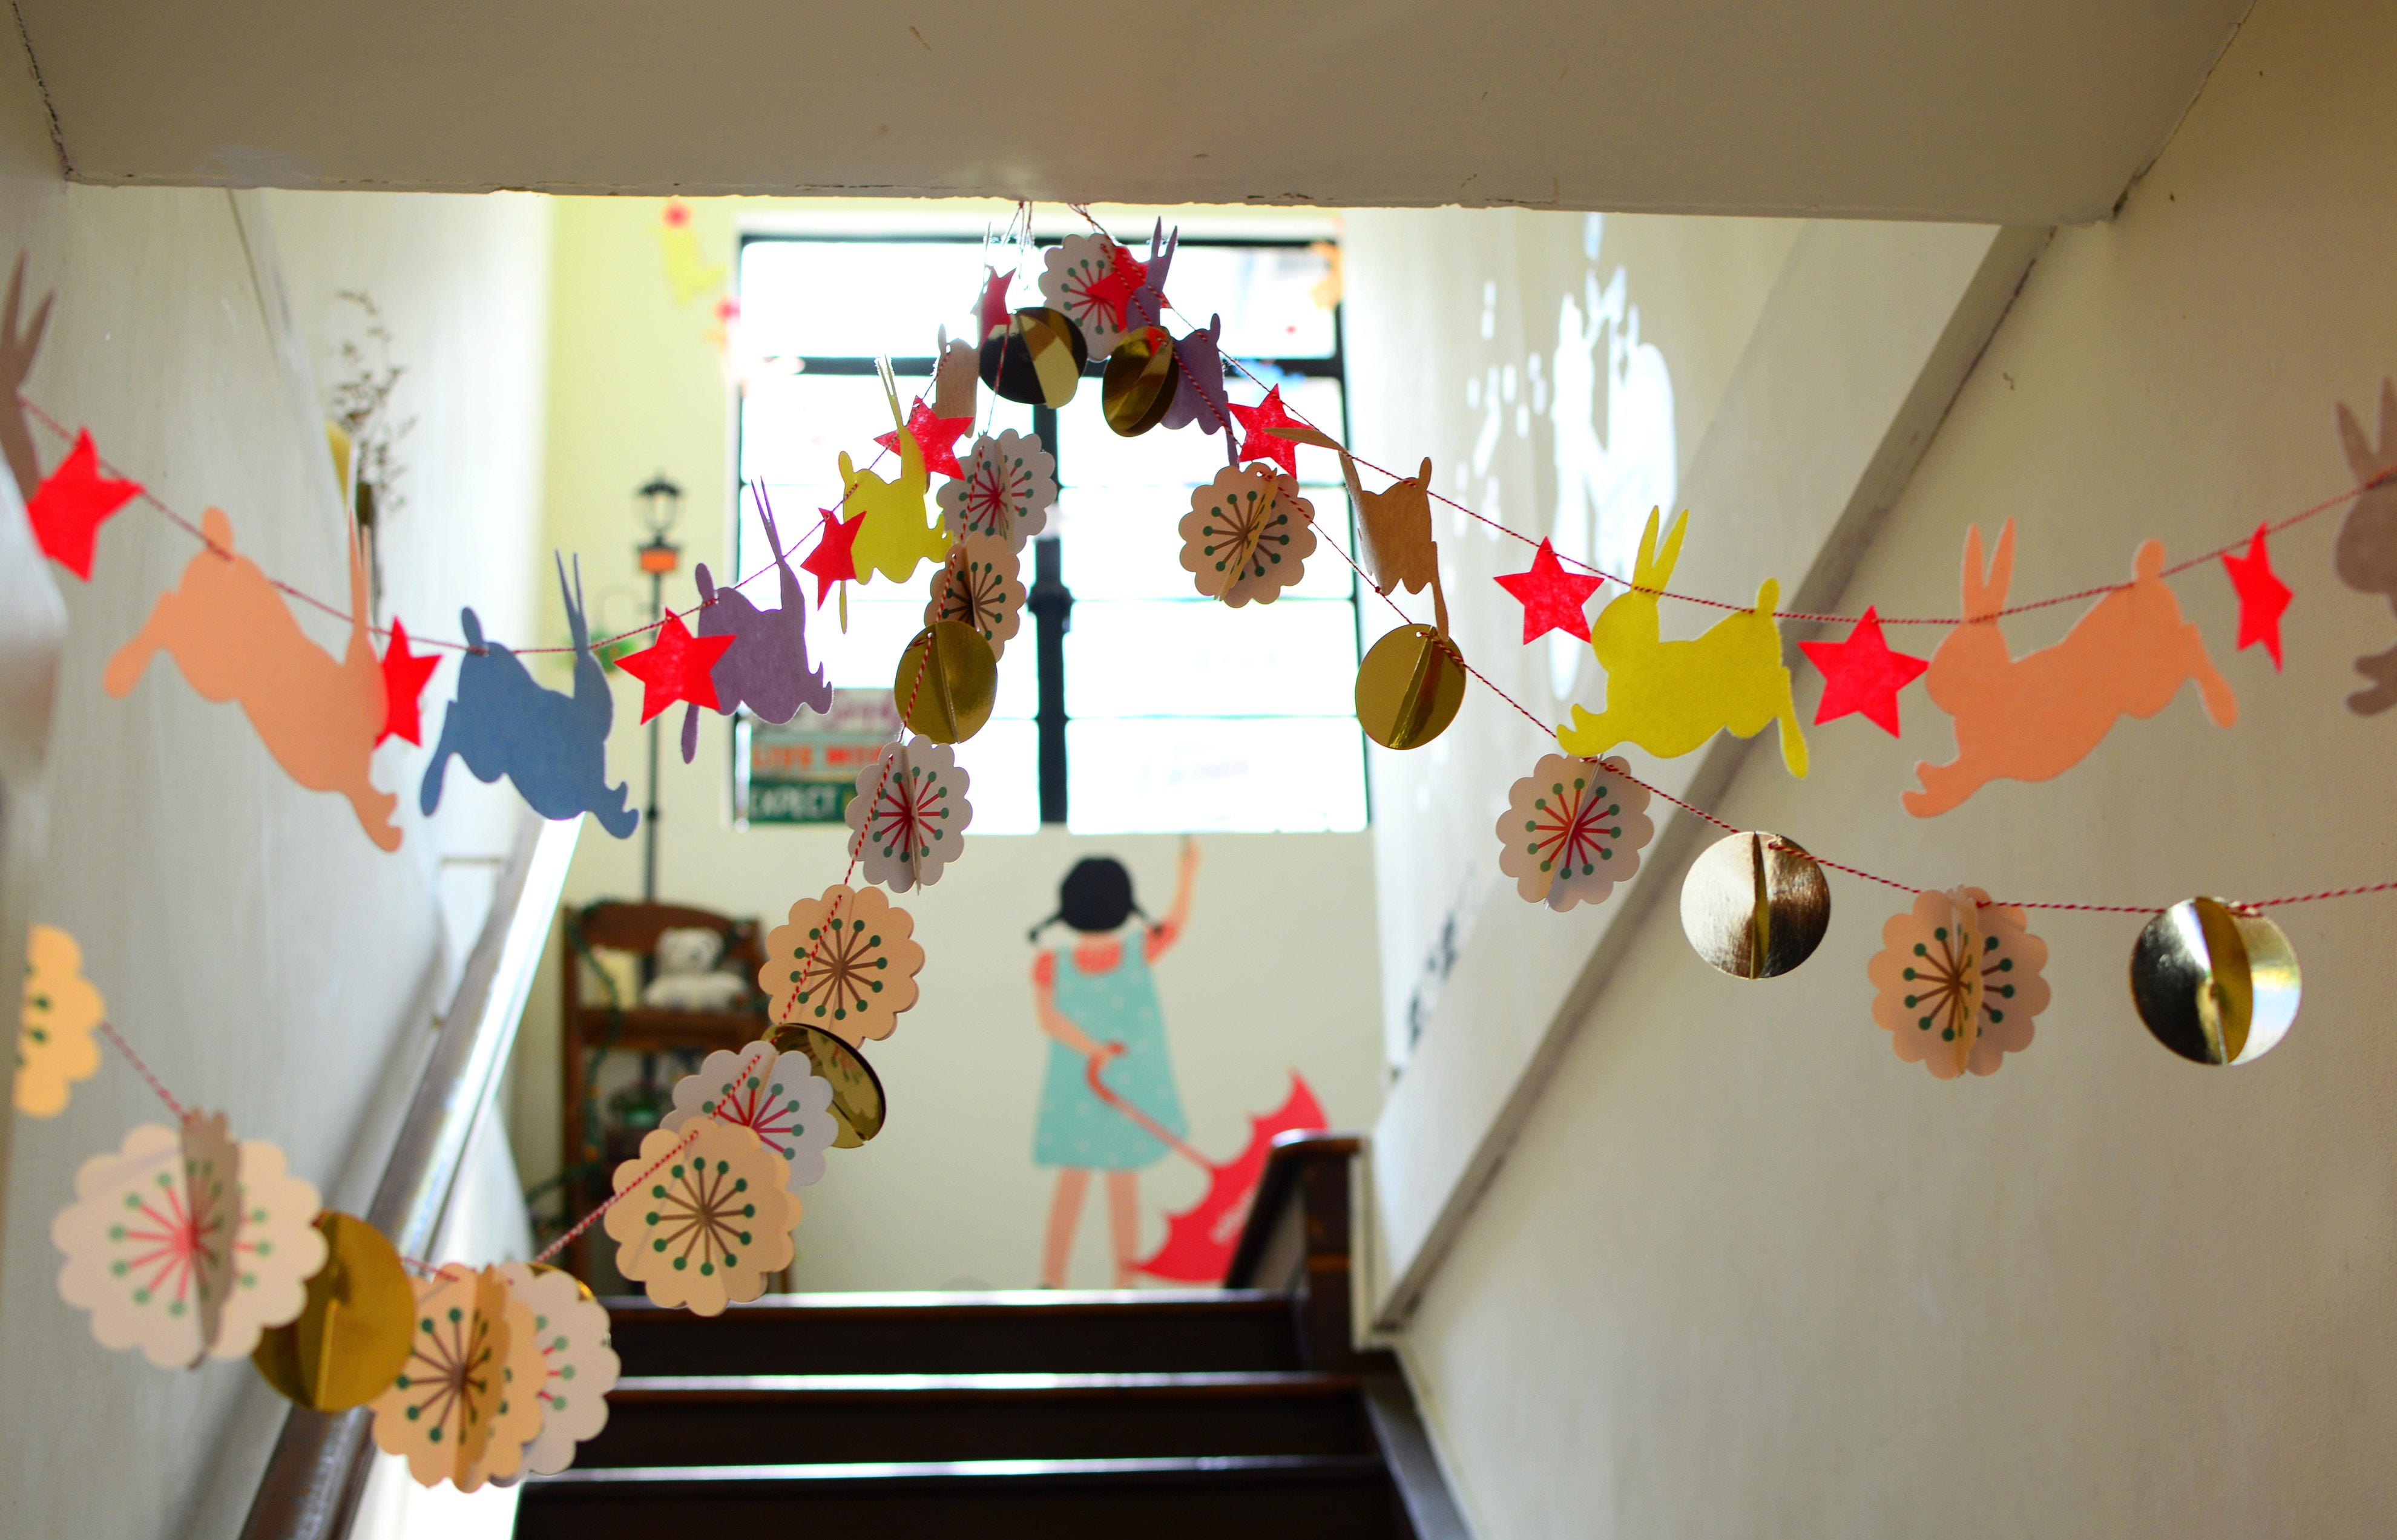 There are garlands of paper rabbits and paper flowers hanging from the ceiling of a staircase.